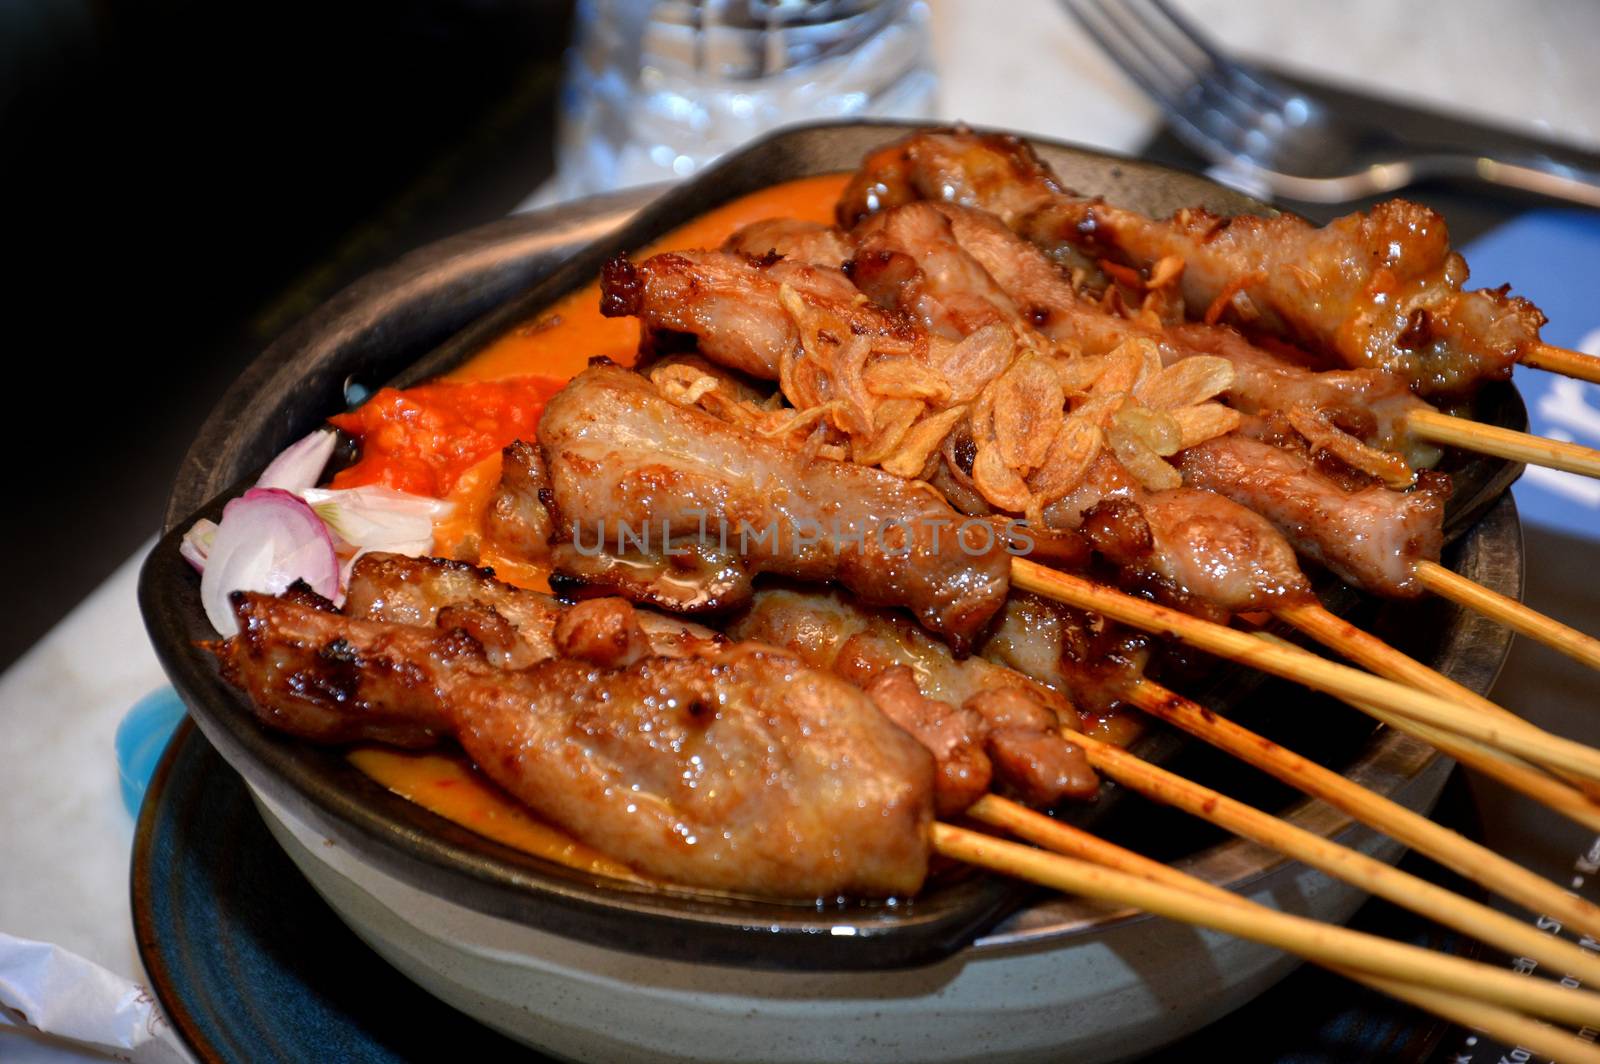 row of satay on the hot plate